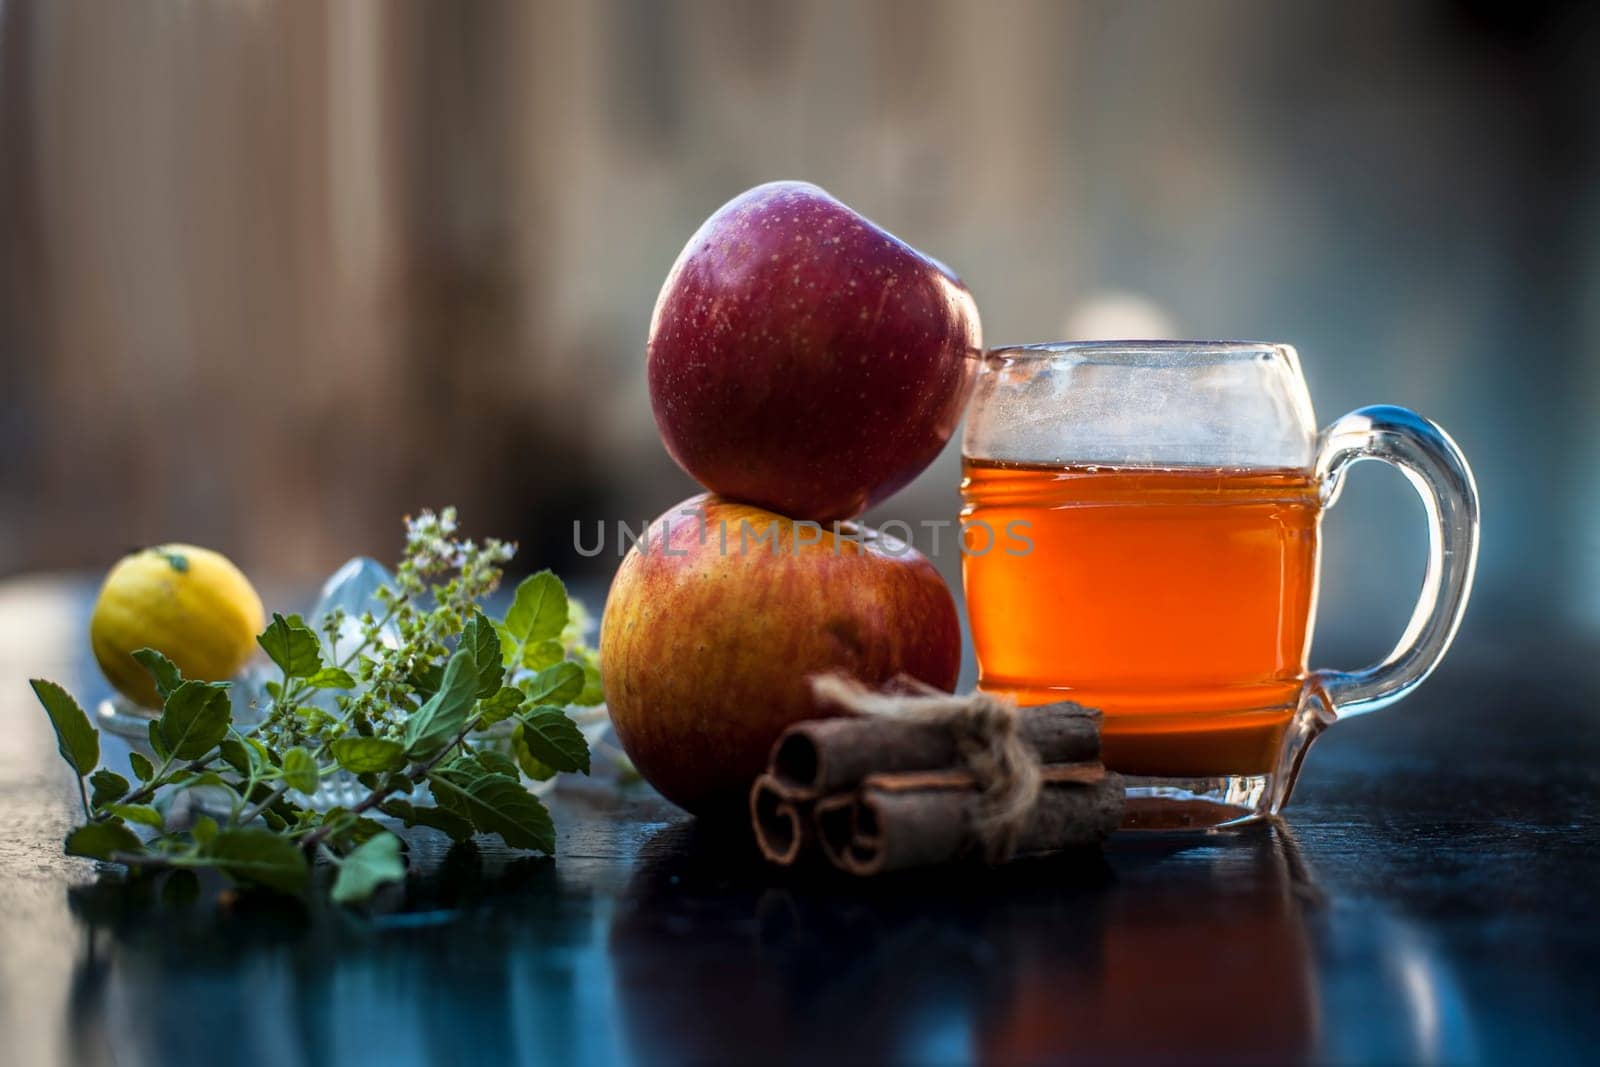 Close-up of herbal and organic juice of apple with orange juice, cinnamon sticks, lemon juice, ginger or adrak, and some tulsi leaves or holy basil leaves in a transparent glass with all raw ingredients.